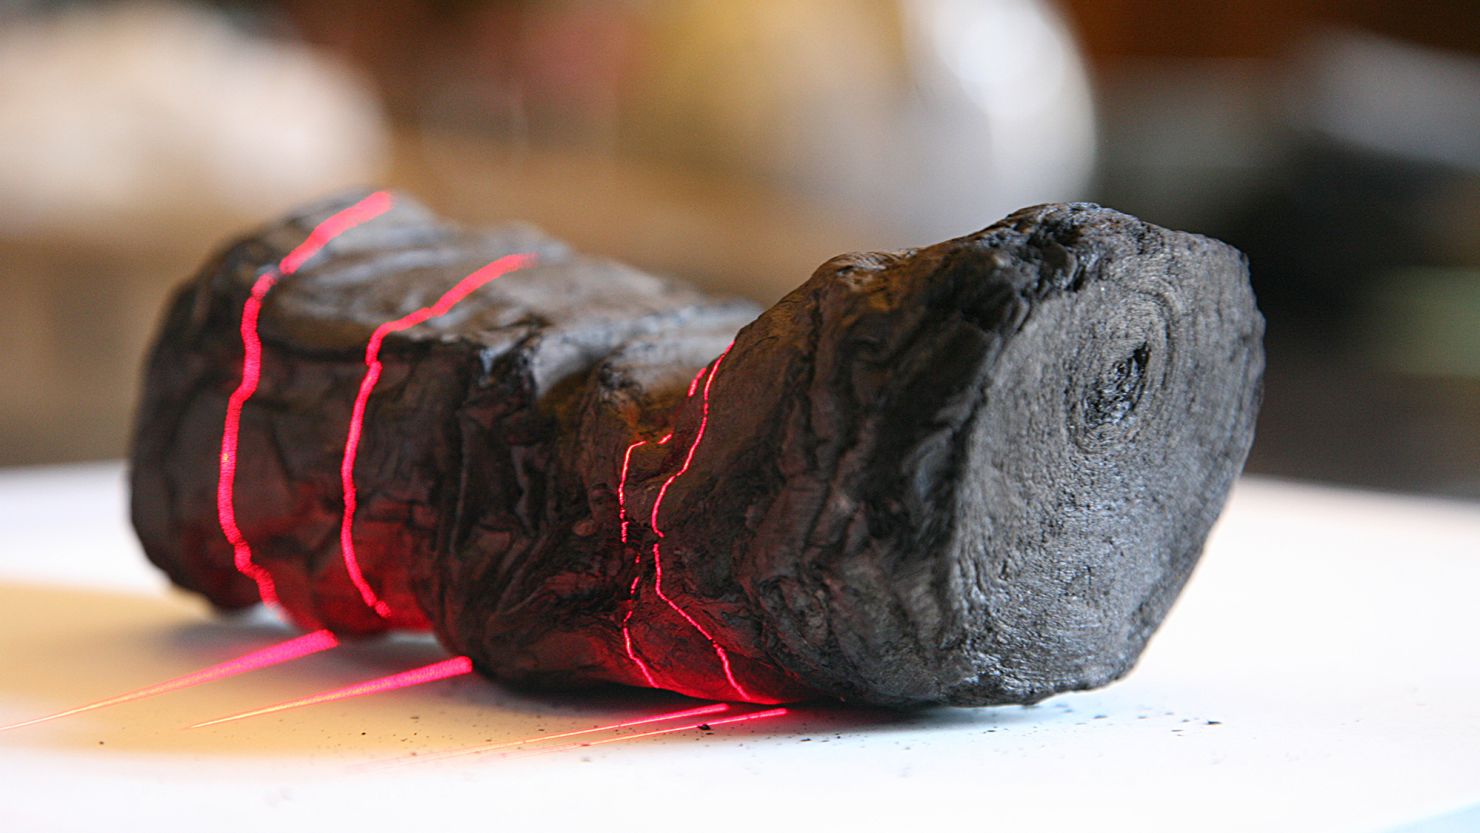 After surviving a volcanic eruption in AD 79, the Herculaneum scrolls are extremely fragile and crumble if taken apart. Using AI, researchers were able to decipher several passages of text from an unrolled scroll.